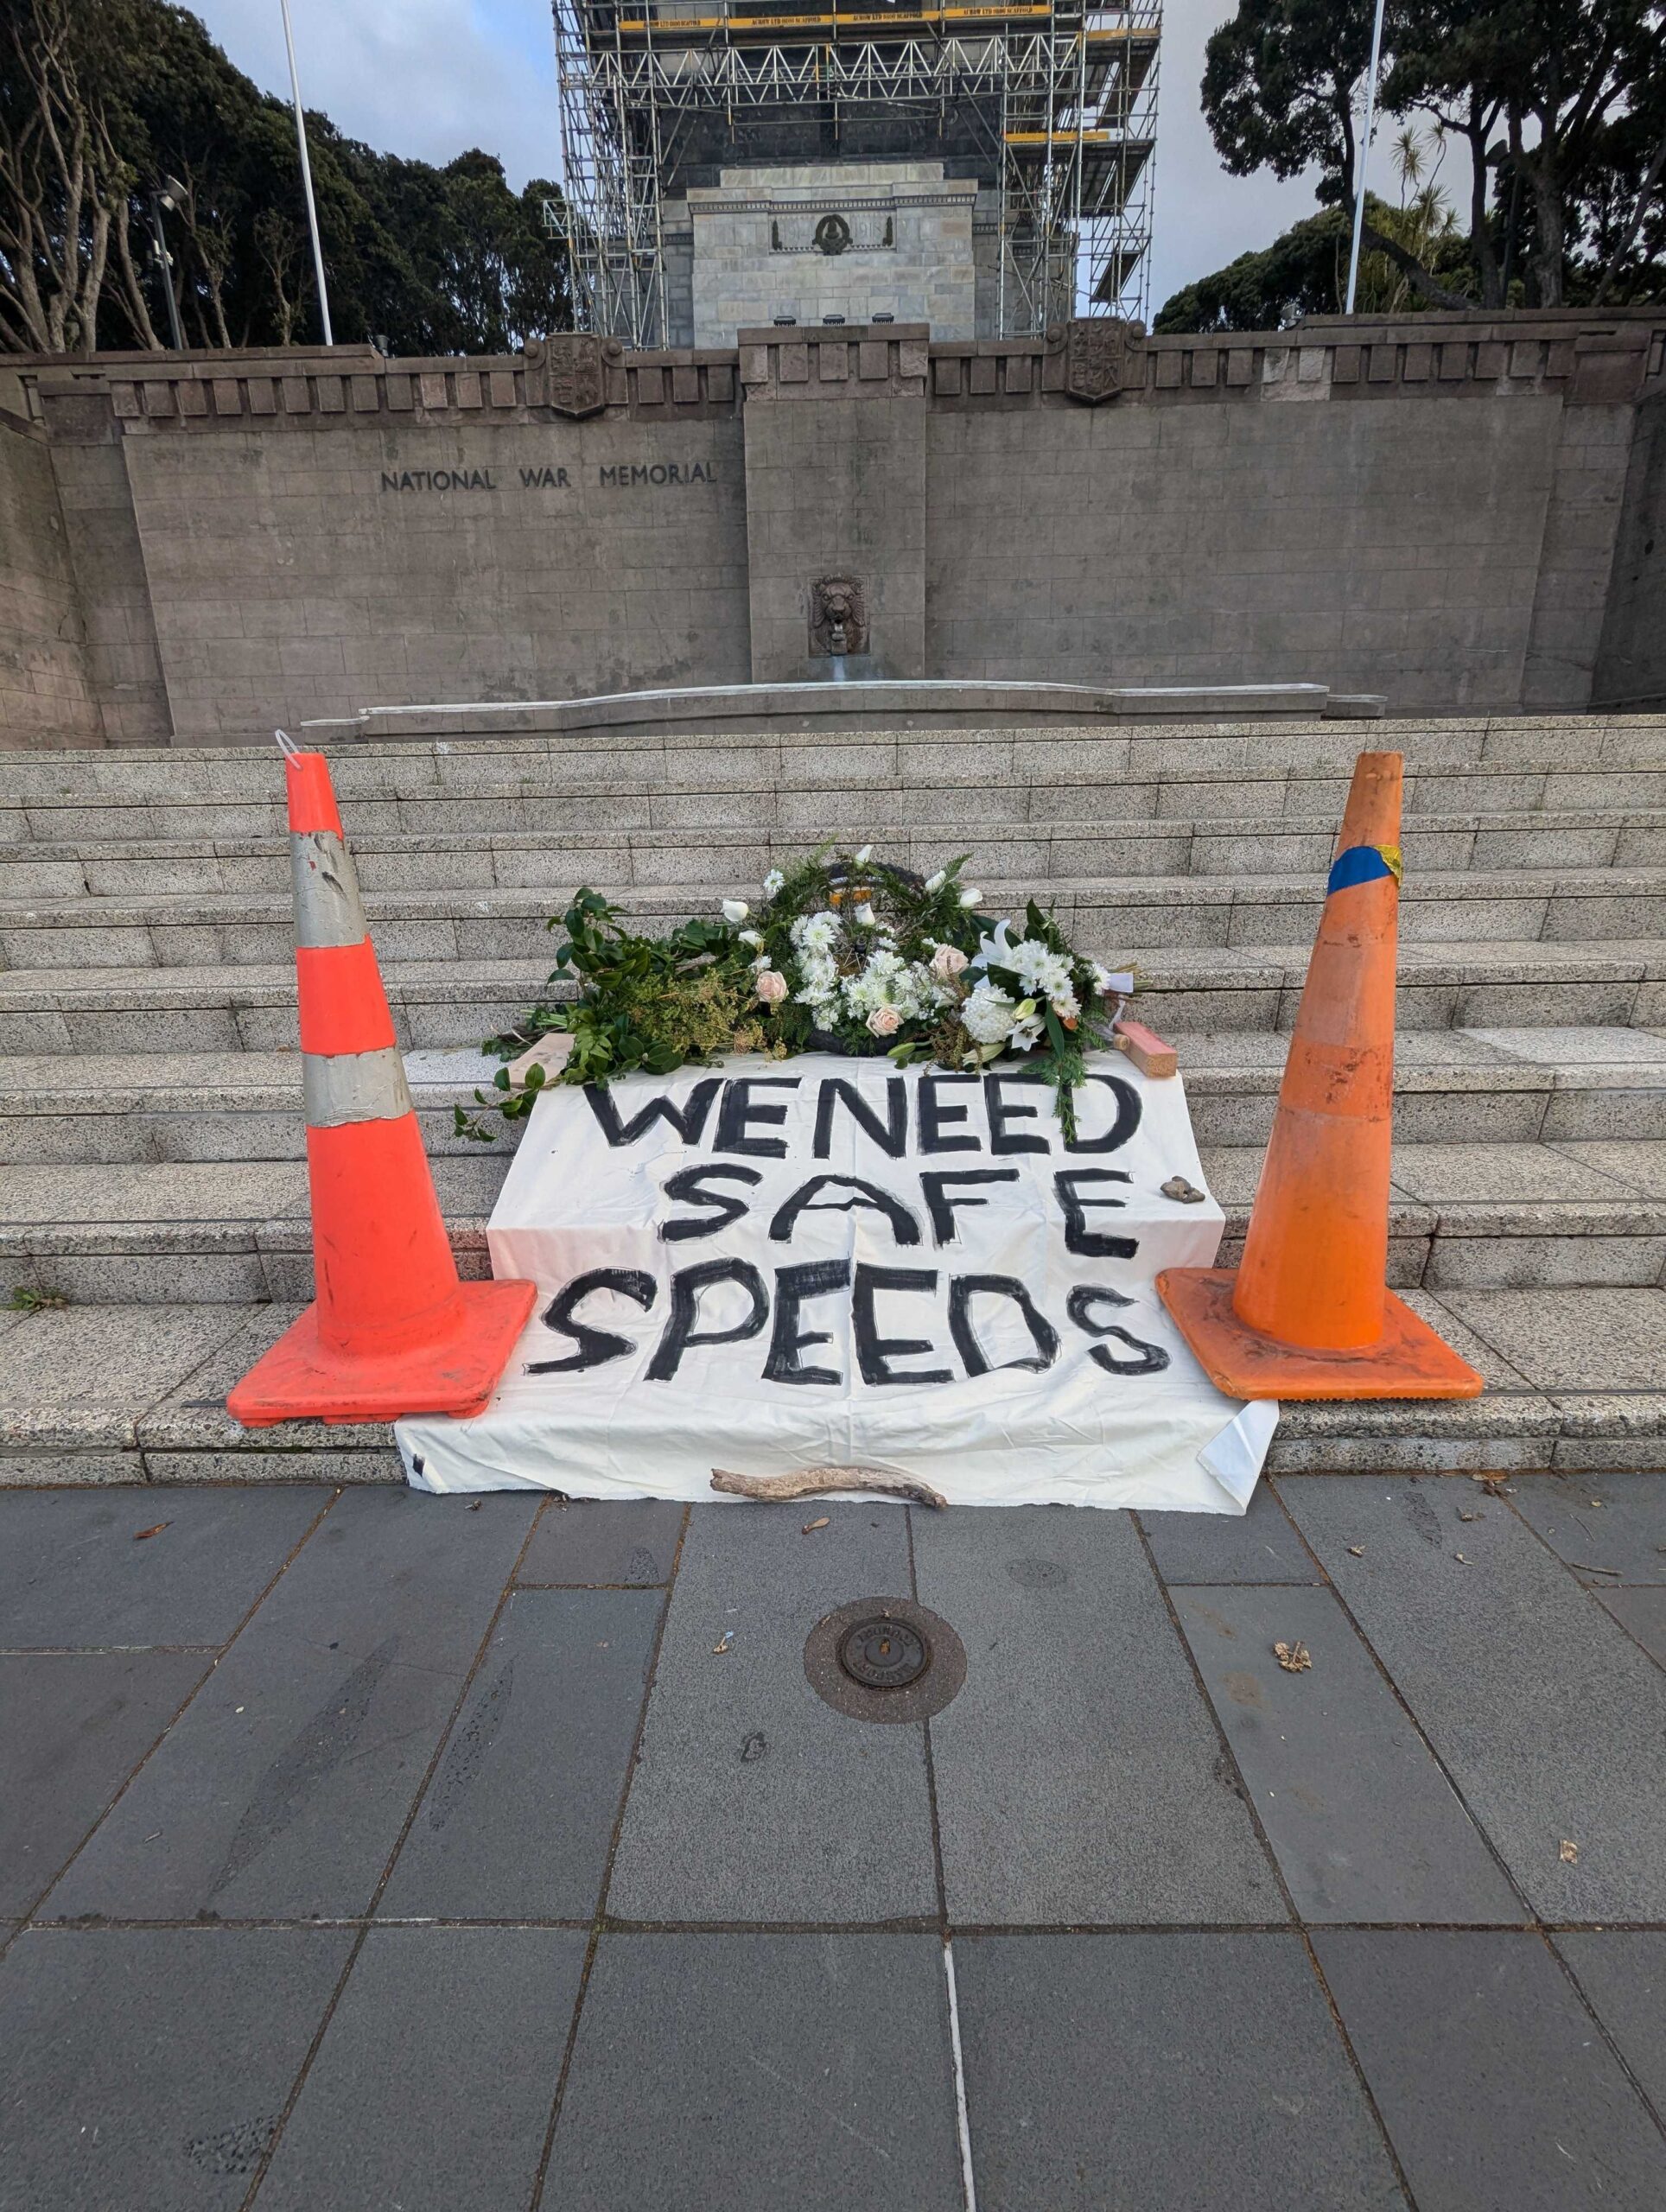 A wreath on steps with road cones and a sign "we need safe speeds"